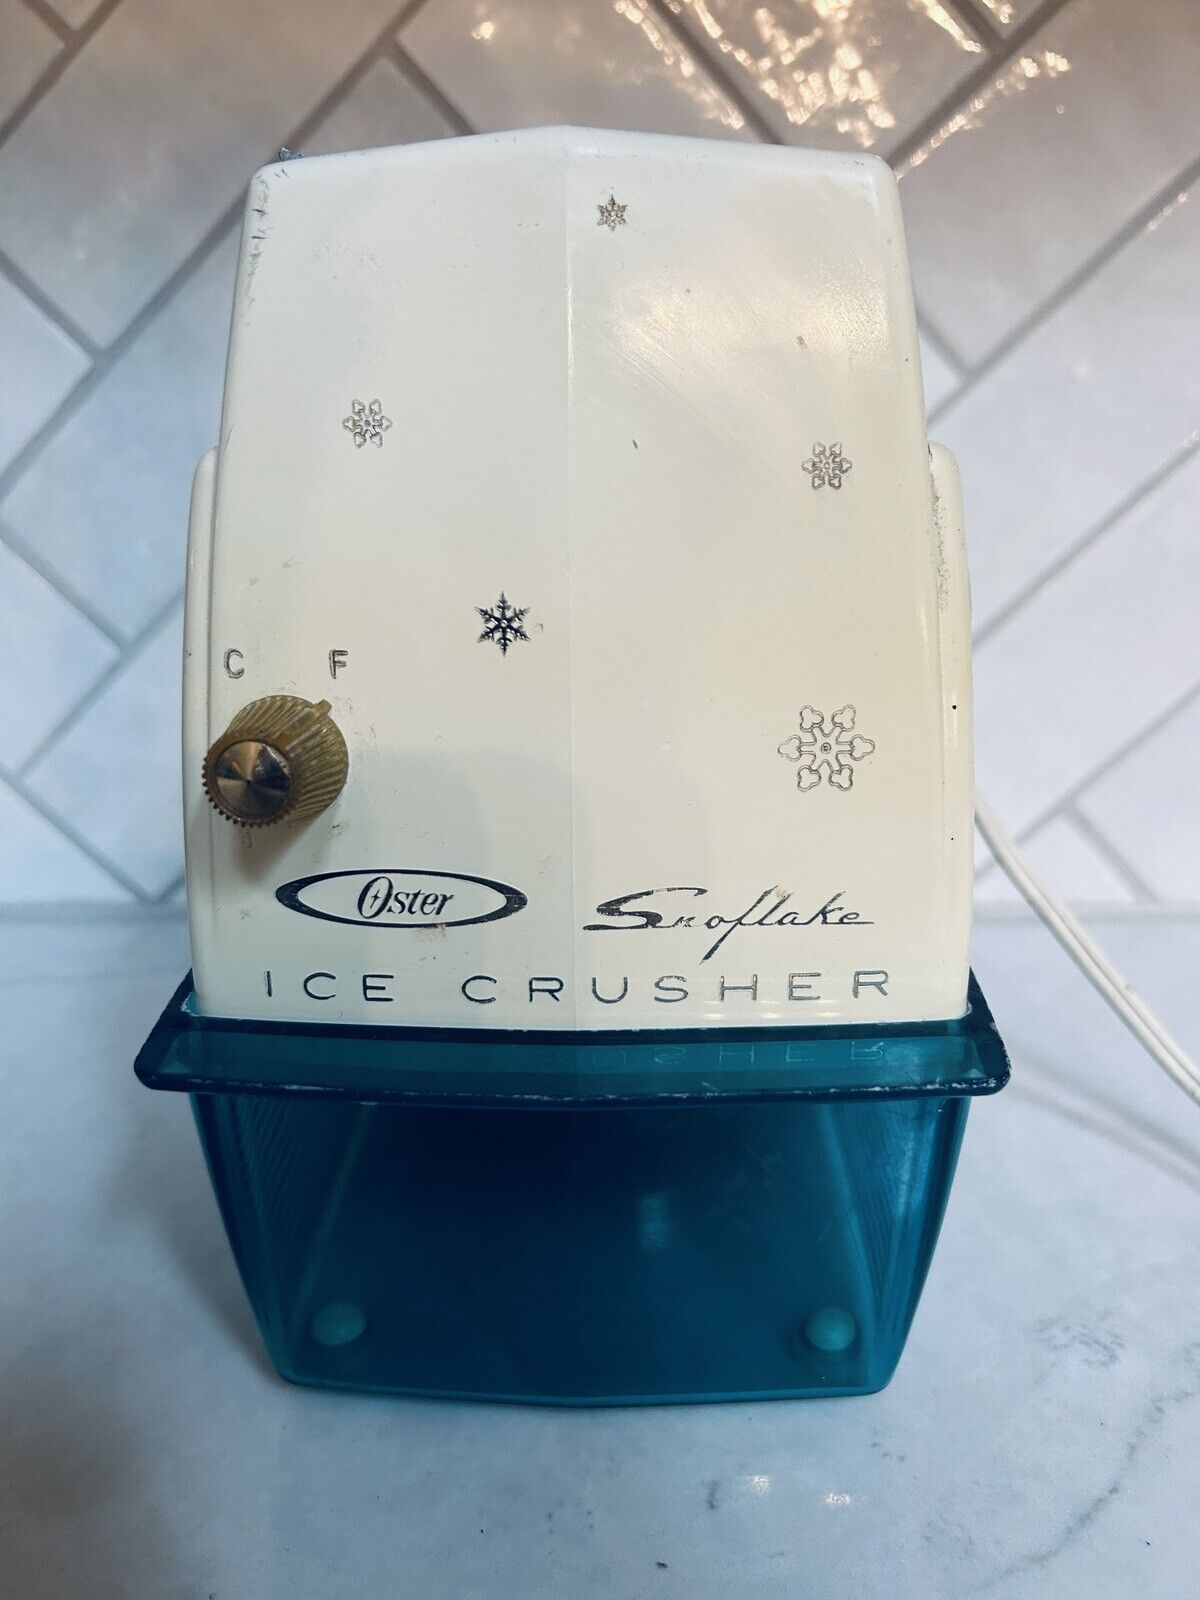 Vintage Oster Snowflake Ice Crusher Model 551 Tested Works